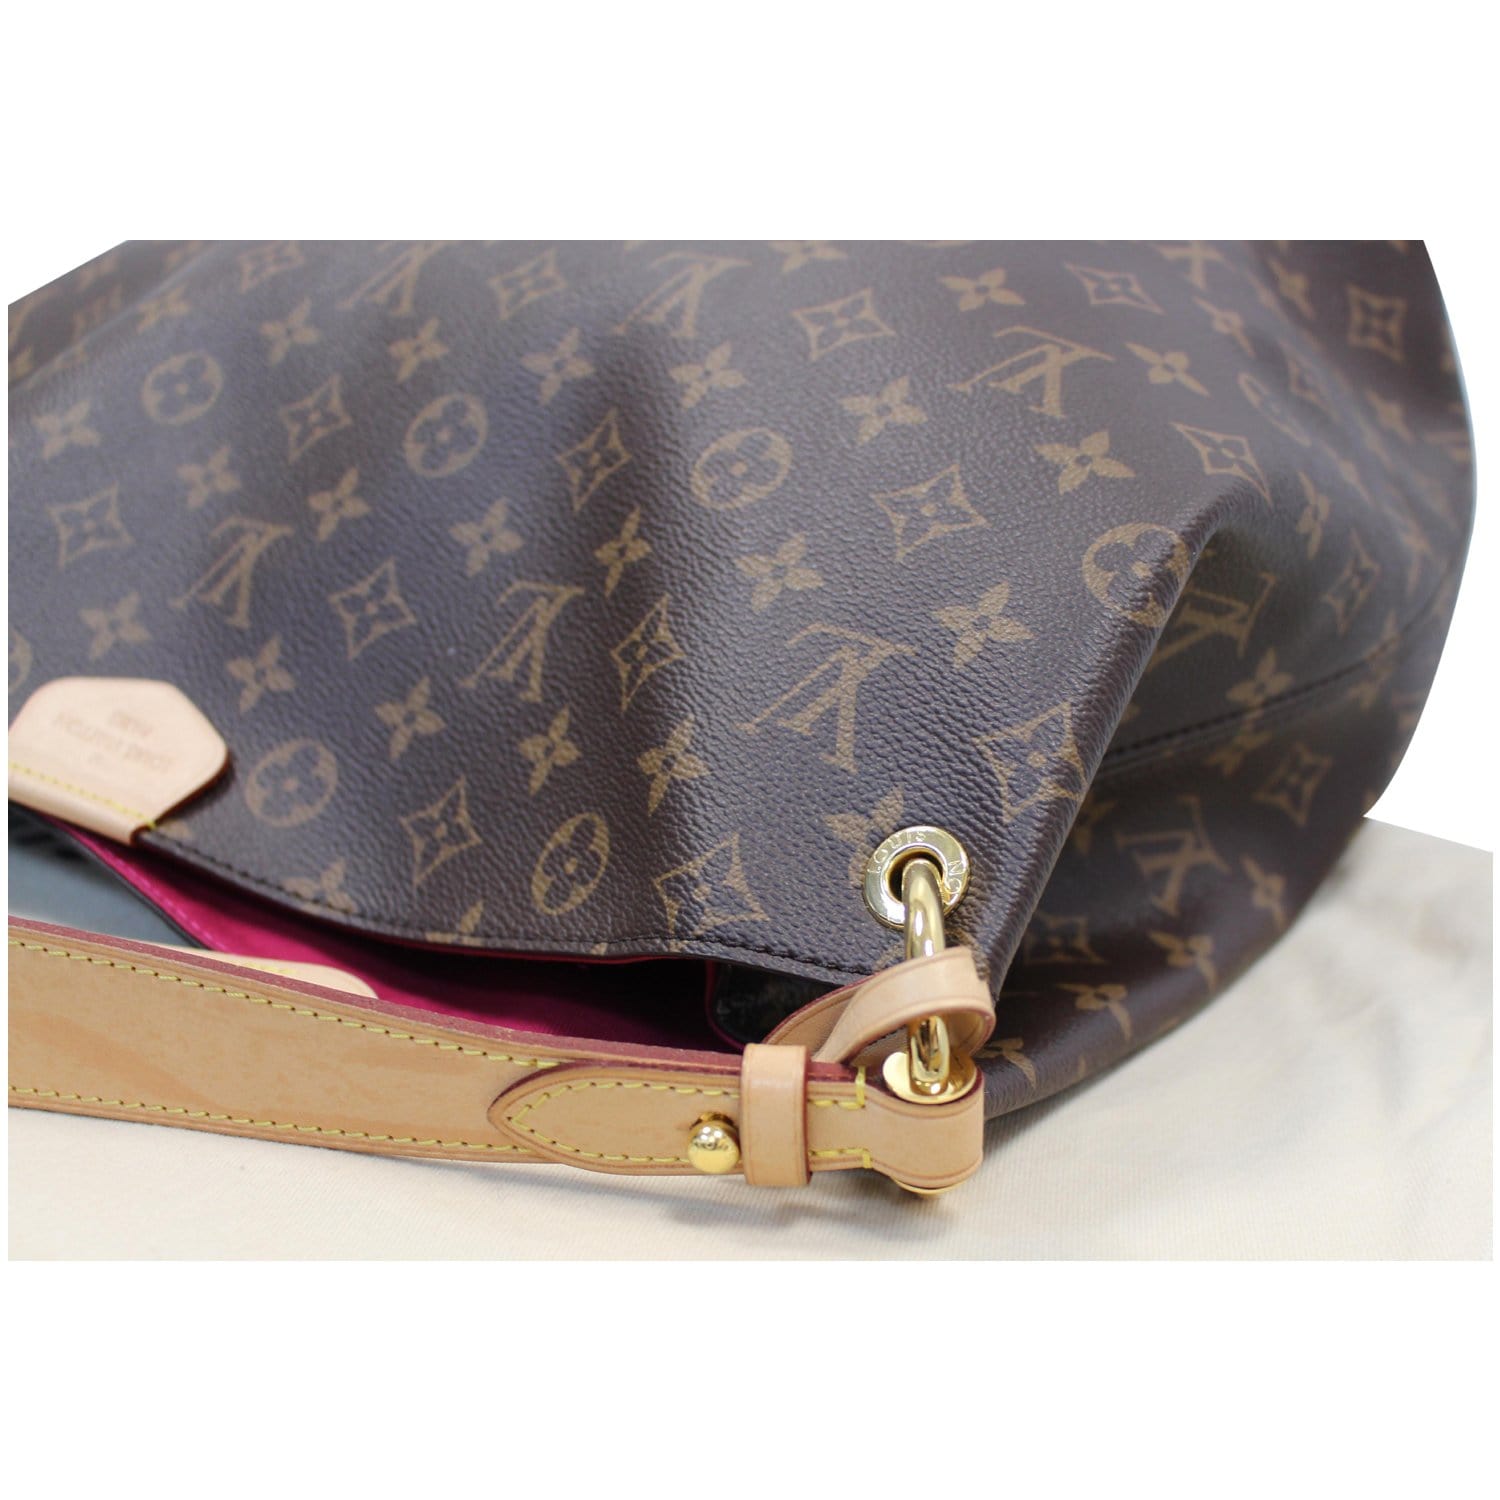 Louis Vuitton Sling Bag - the stitching & detail on this one is